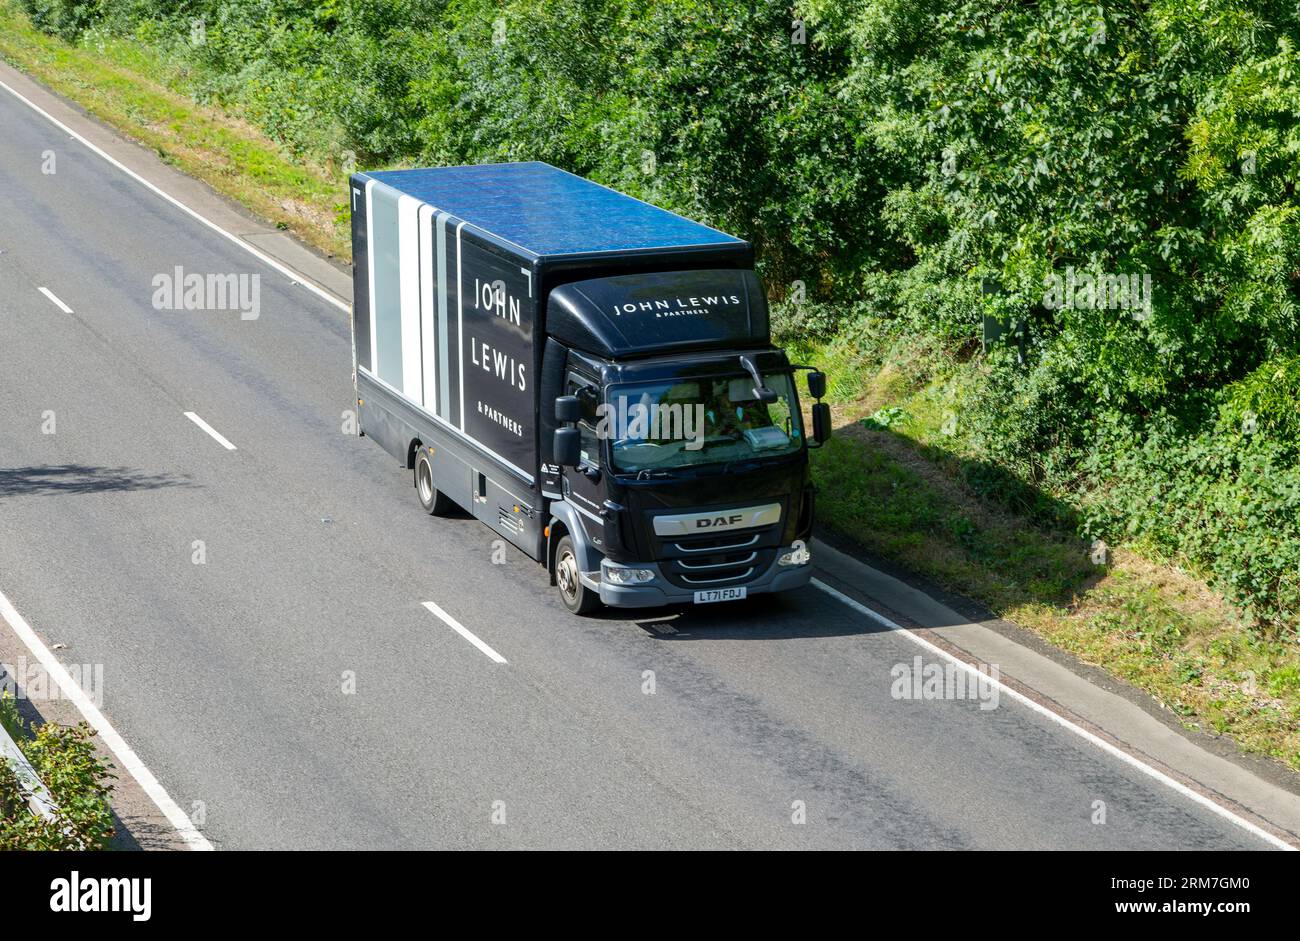 DAF delivery vehicle operated by John Lewis on A12 near Wickham Market, Suffolk, England, UL Stock Photo